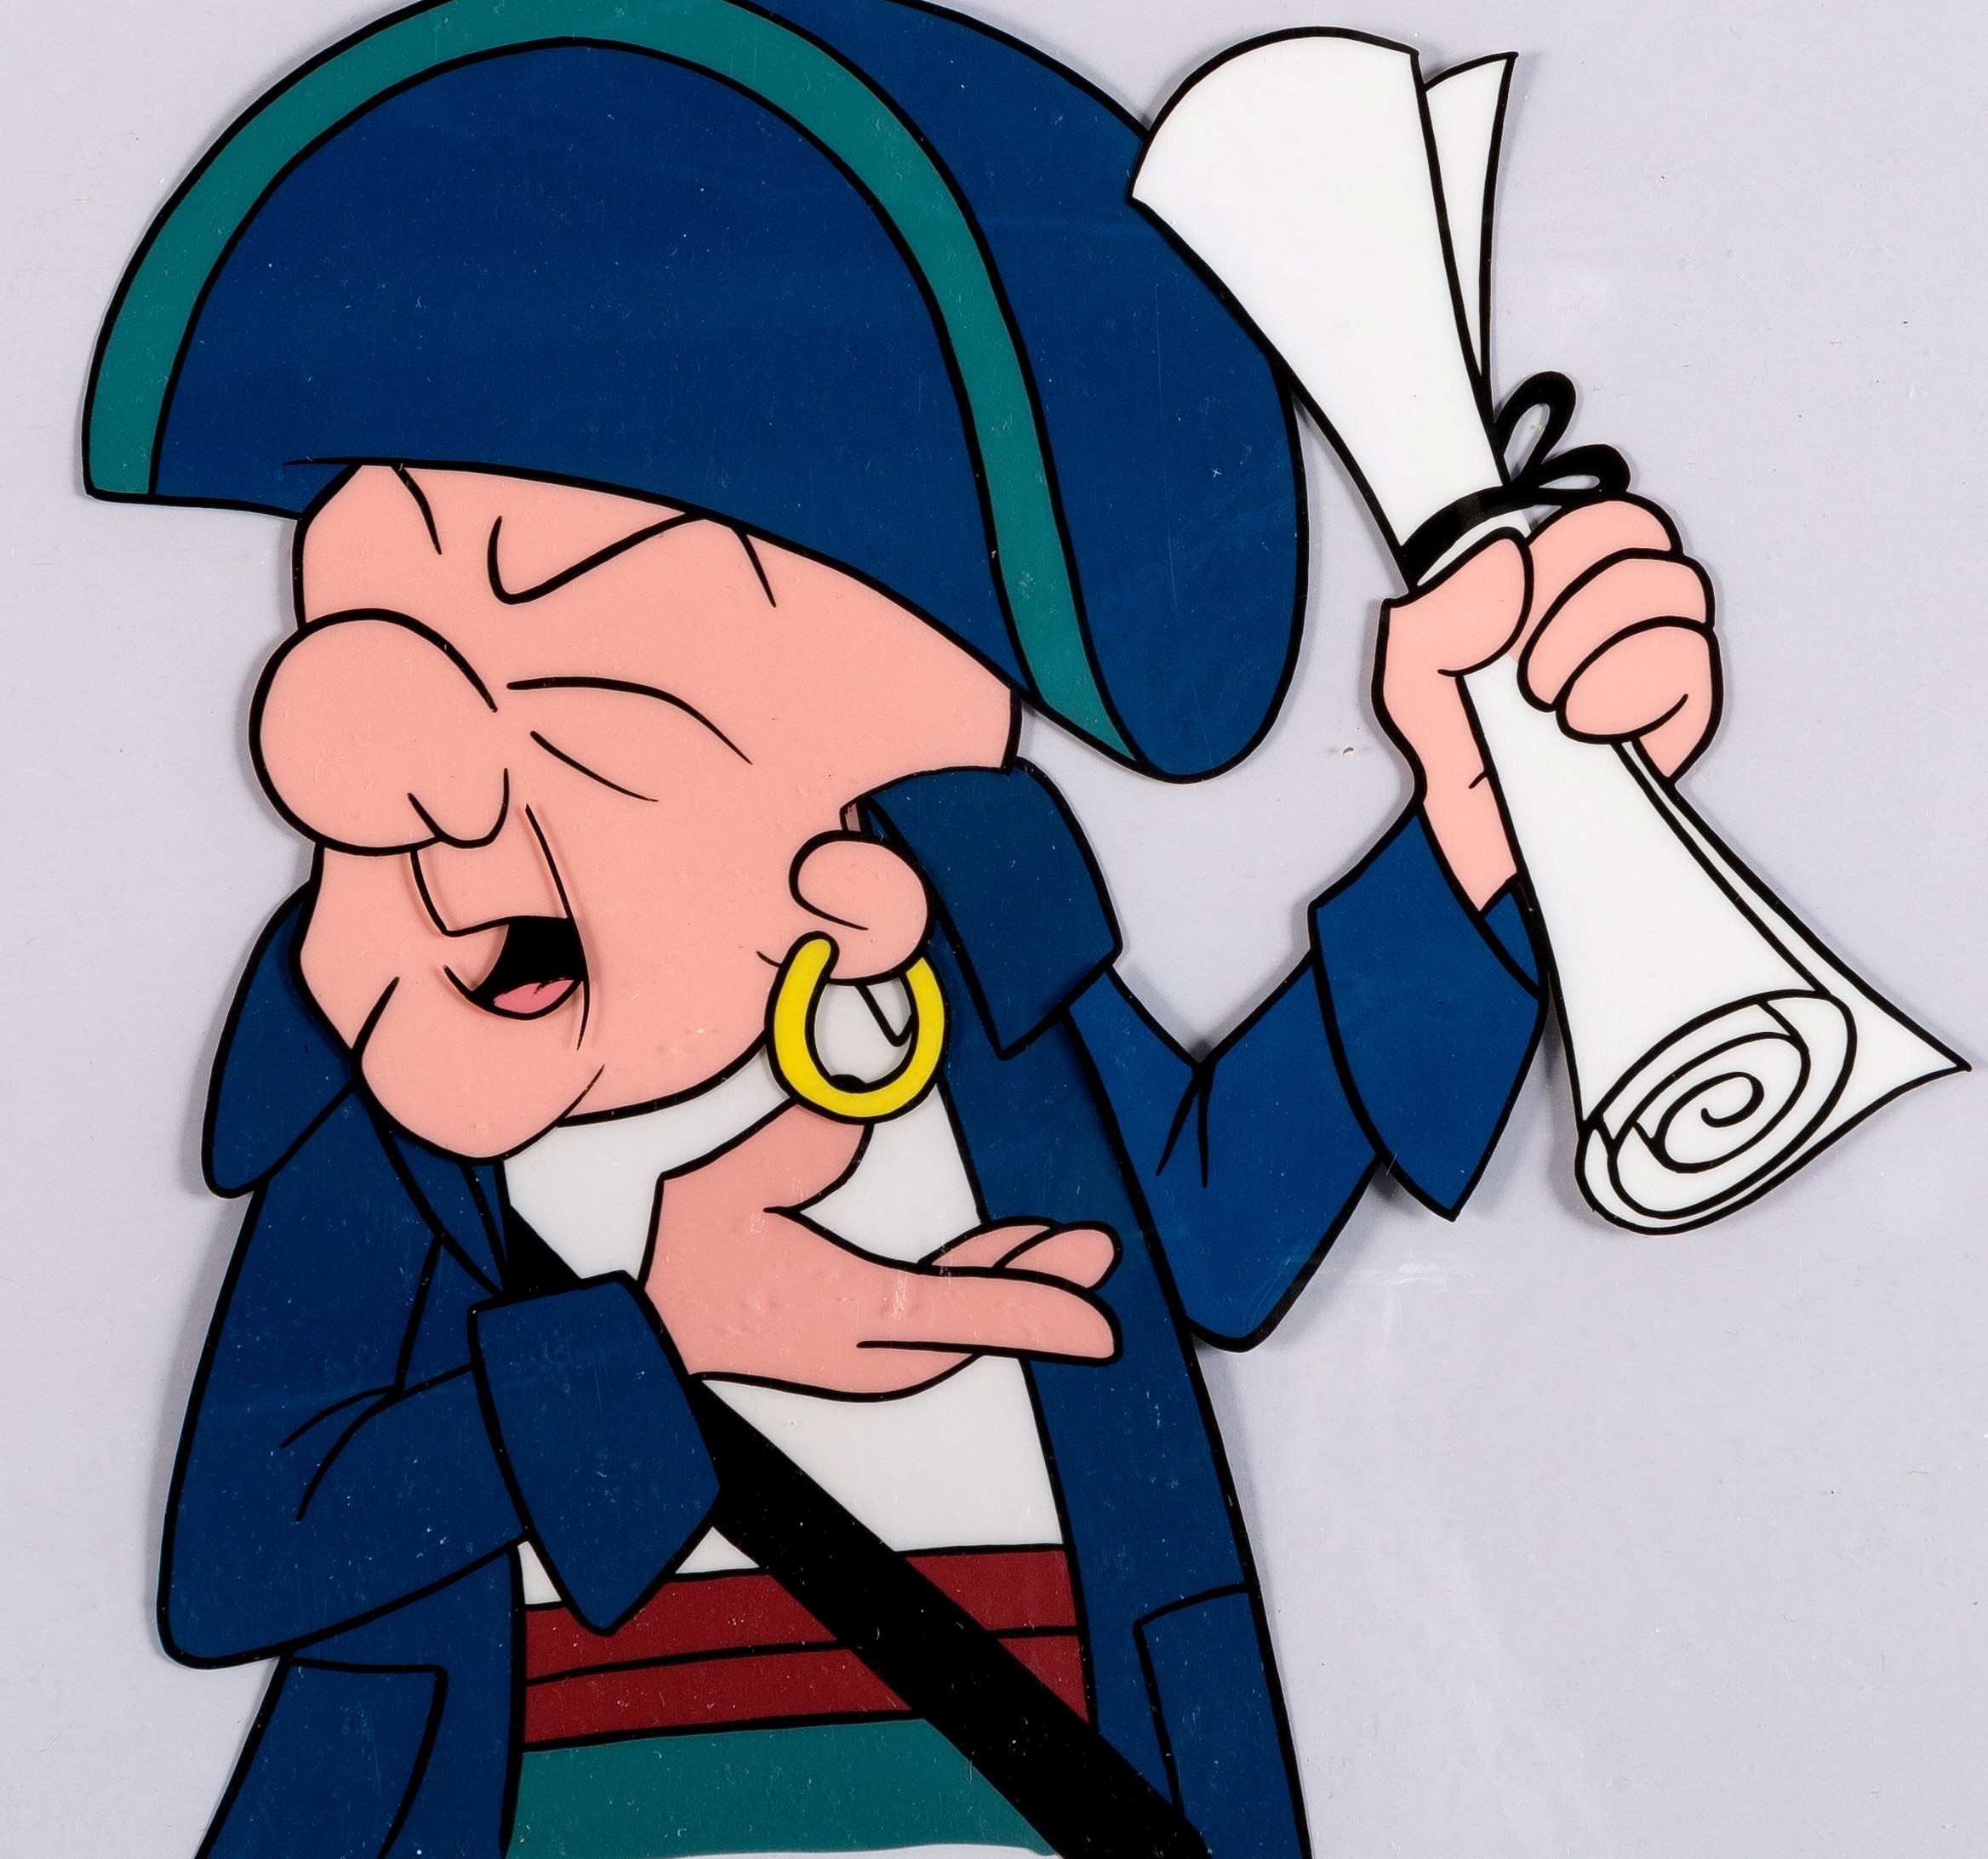 16 Facts About Mr. Magoo (The Famous Adventures Of Mr. Magoo) - Facts.net